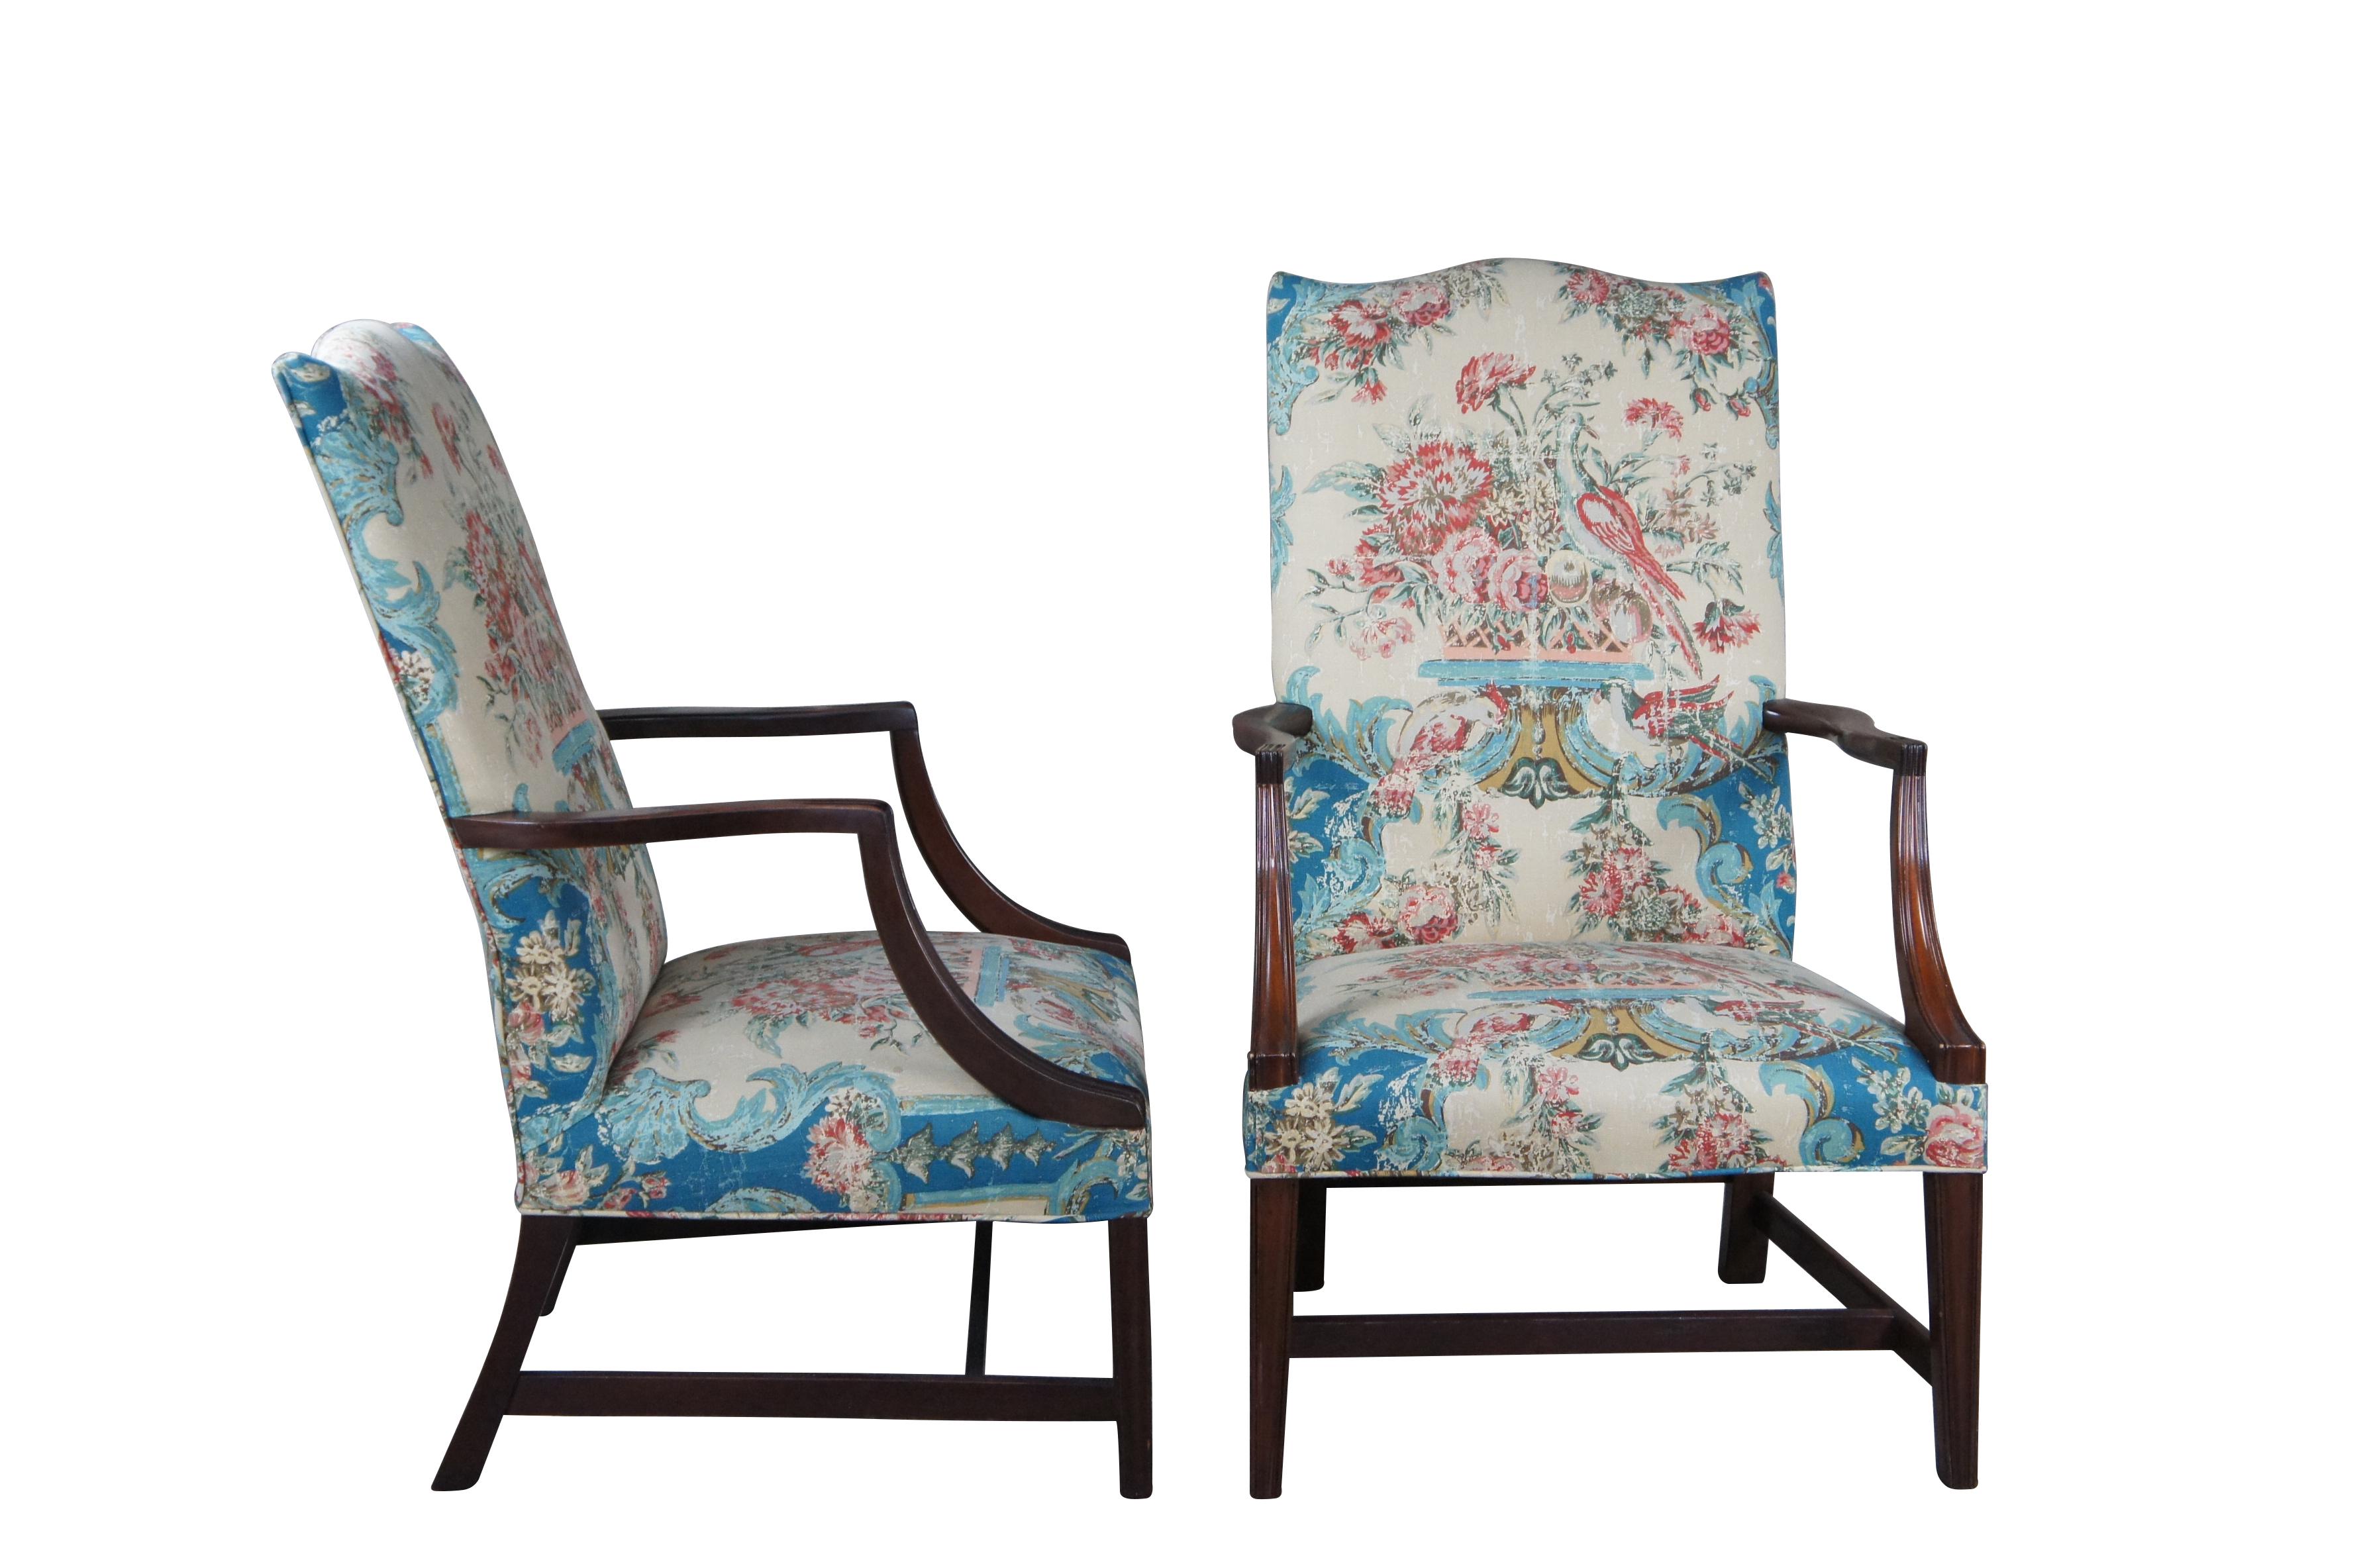 Pair of 20th Century Federal Style Martha Washington Lolling armchairs.  Reminiscent of the Gainsborough chair that was made in England in the 18th century.  Made of mahogany featuring traditional wide form with serpentine high back and open